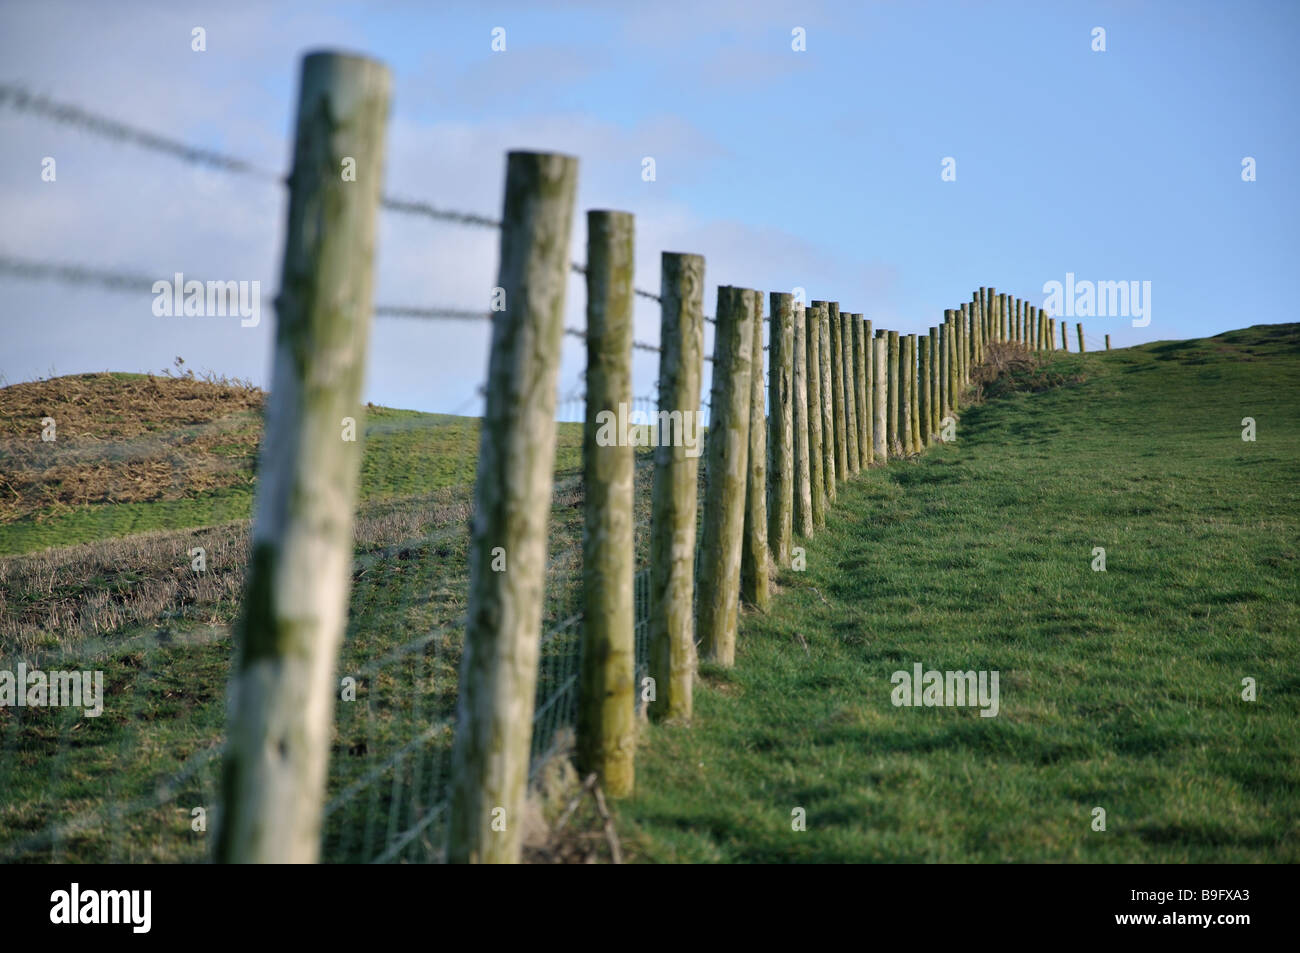 Fence posts with middle focus Stock Photo